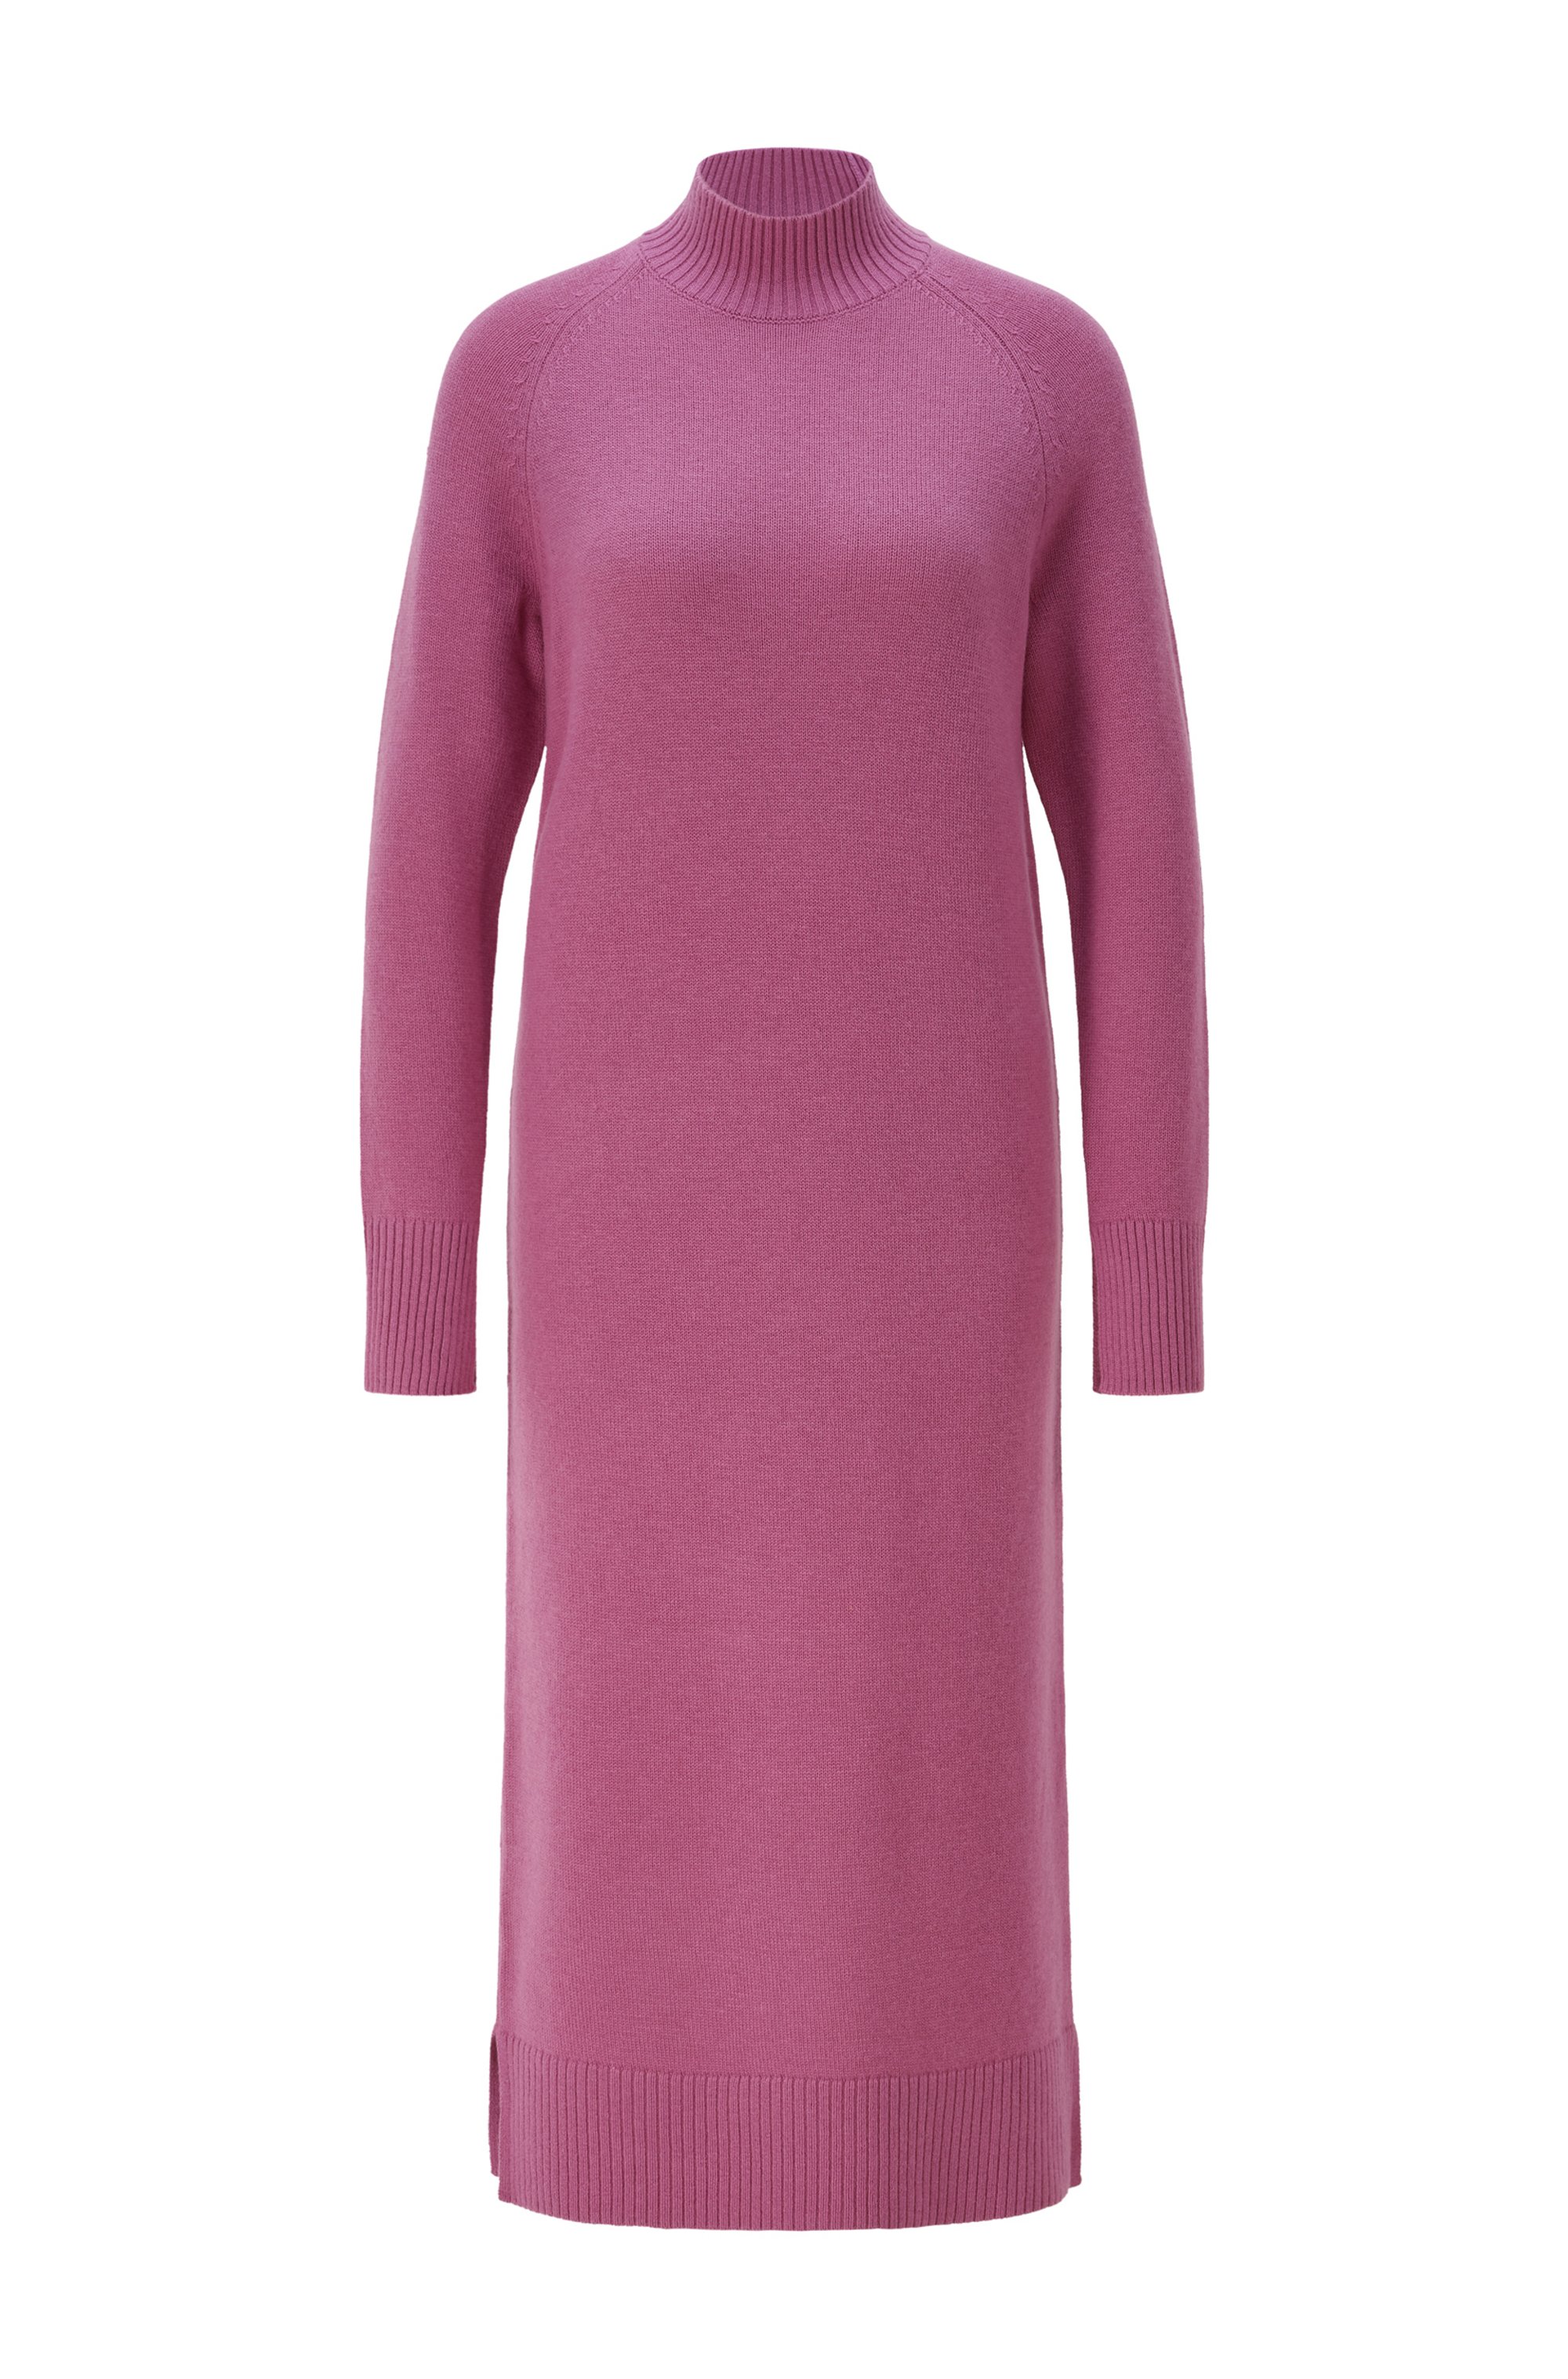 Long-sleeved knitted dress in virgin wool and cashmere, Purple